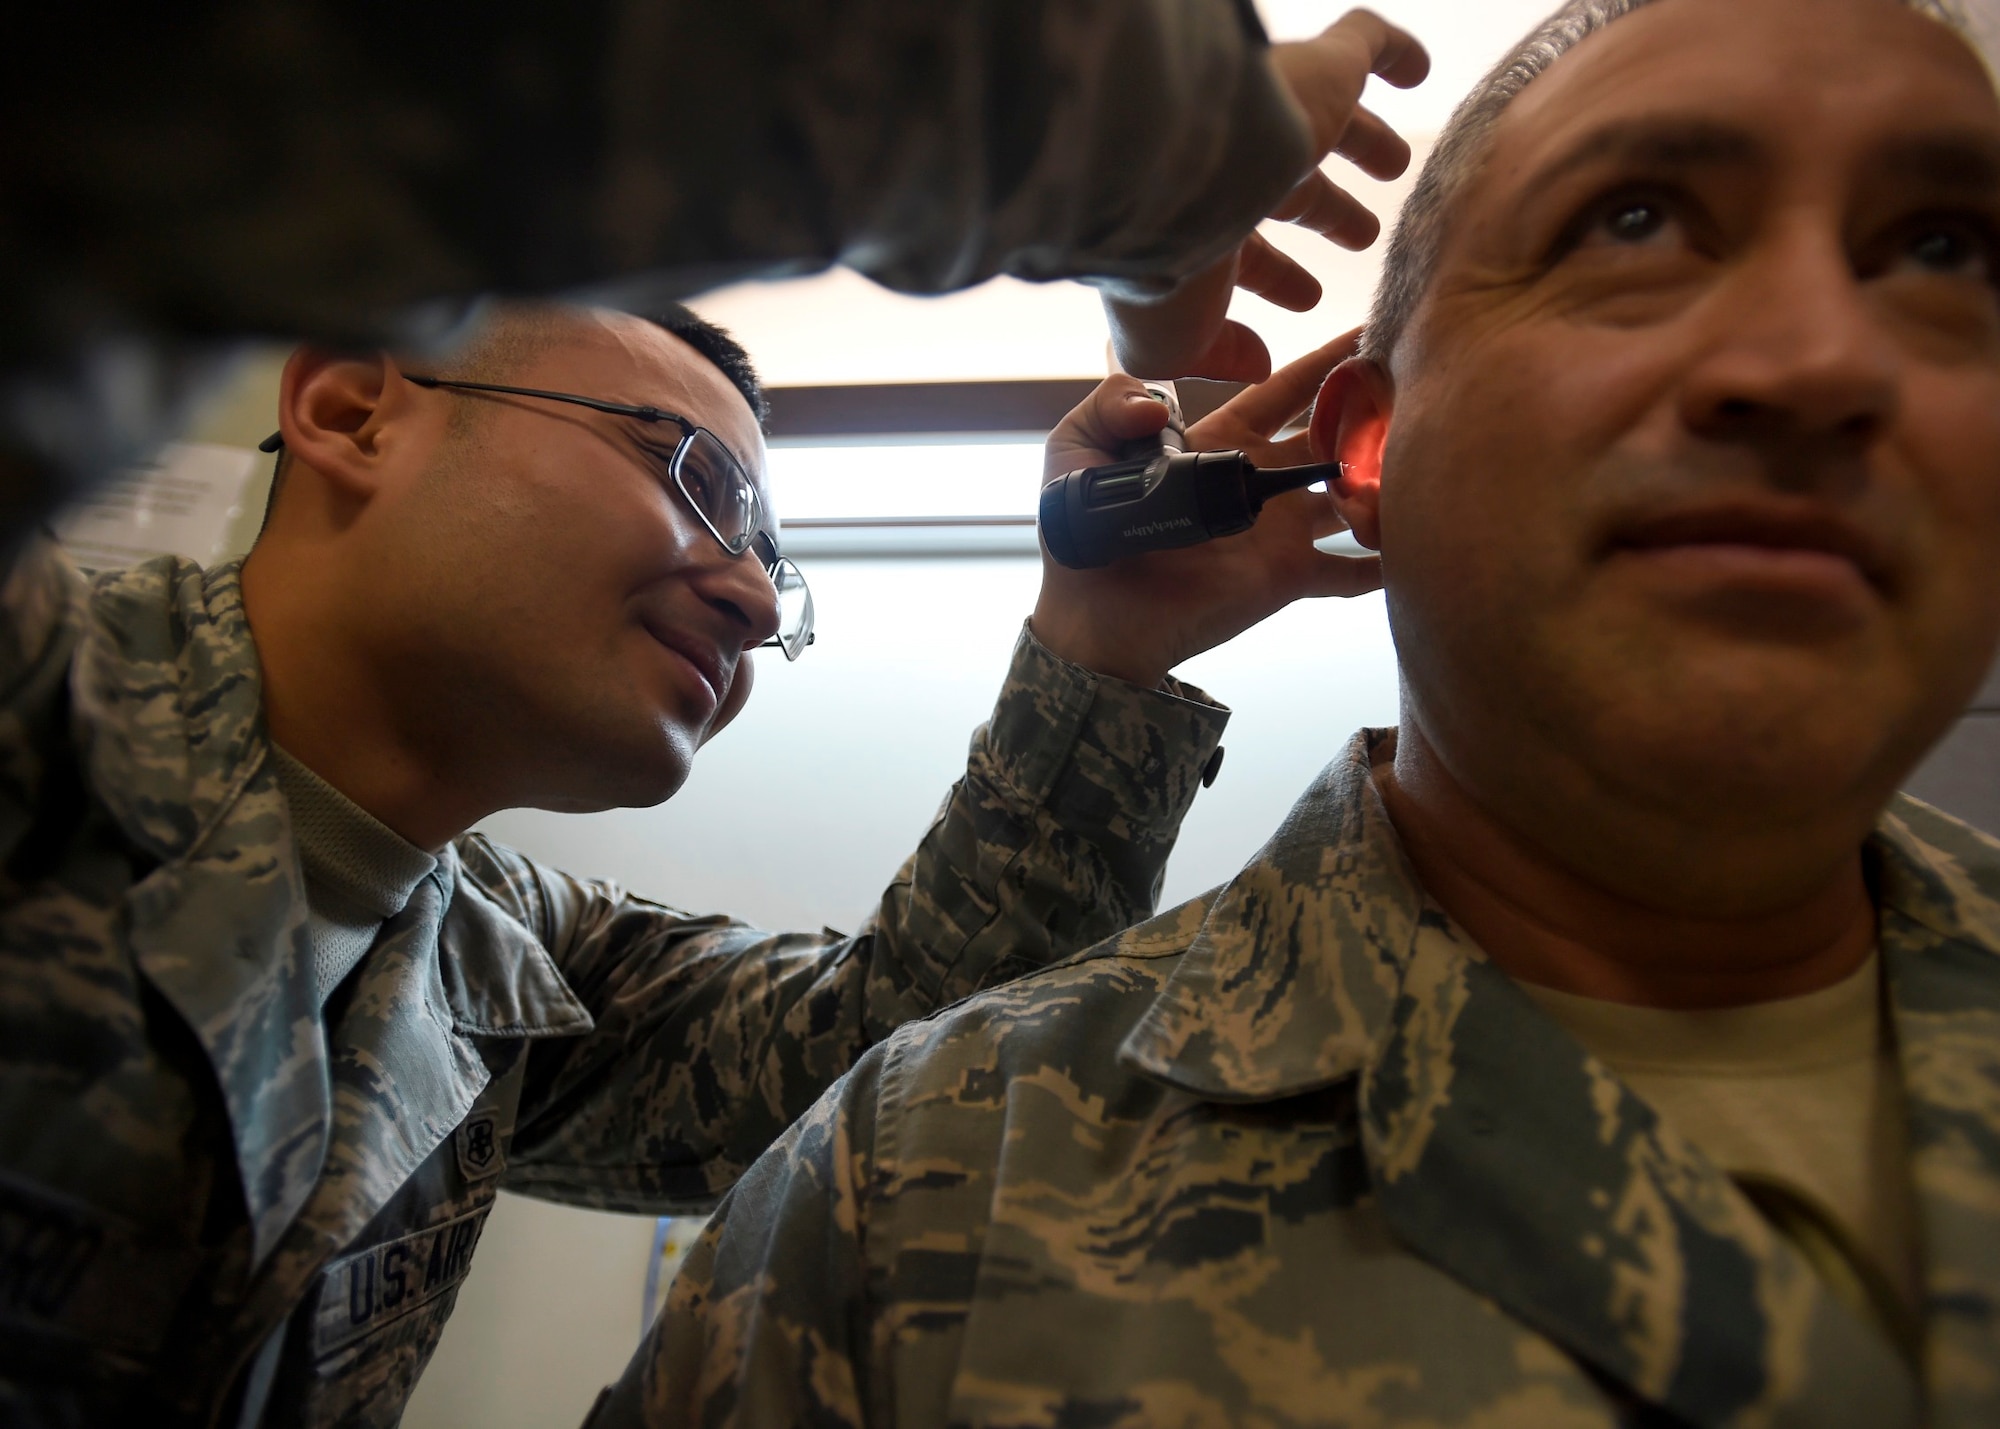 Senior Airman Jherico Guerrero, 559th Medical Group Public Health Technician, checks a patient’s ear prior to administering a hearing test at the Deployment Related Health Clinic, part of the 59th Medical Wing Base Operational Medicine Clinic at the Wilford Hall Ambulatory Surgical Center, Joint Base San Antonio-Lackland, Texas, Feb 24. The DRHC will see approximately 250 members a month for deployment health assessments. (U.S. Air Force photo/Staff Sgt. Kevin Iinuma)